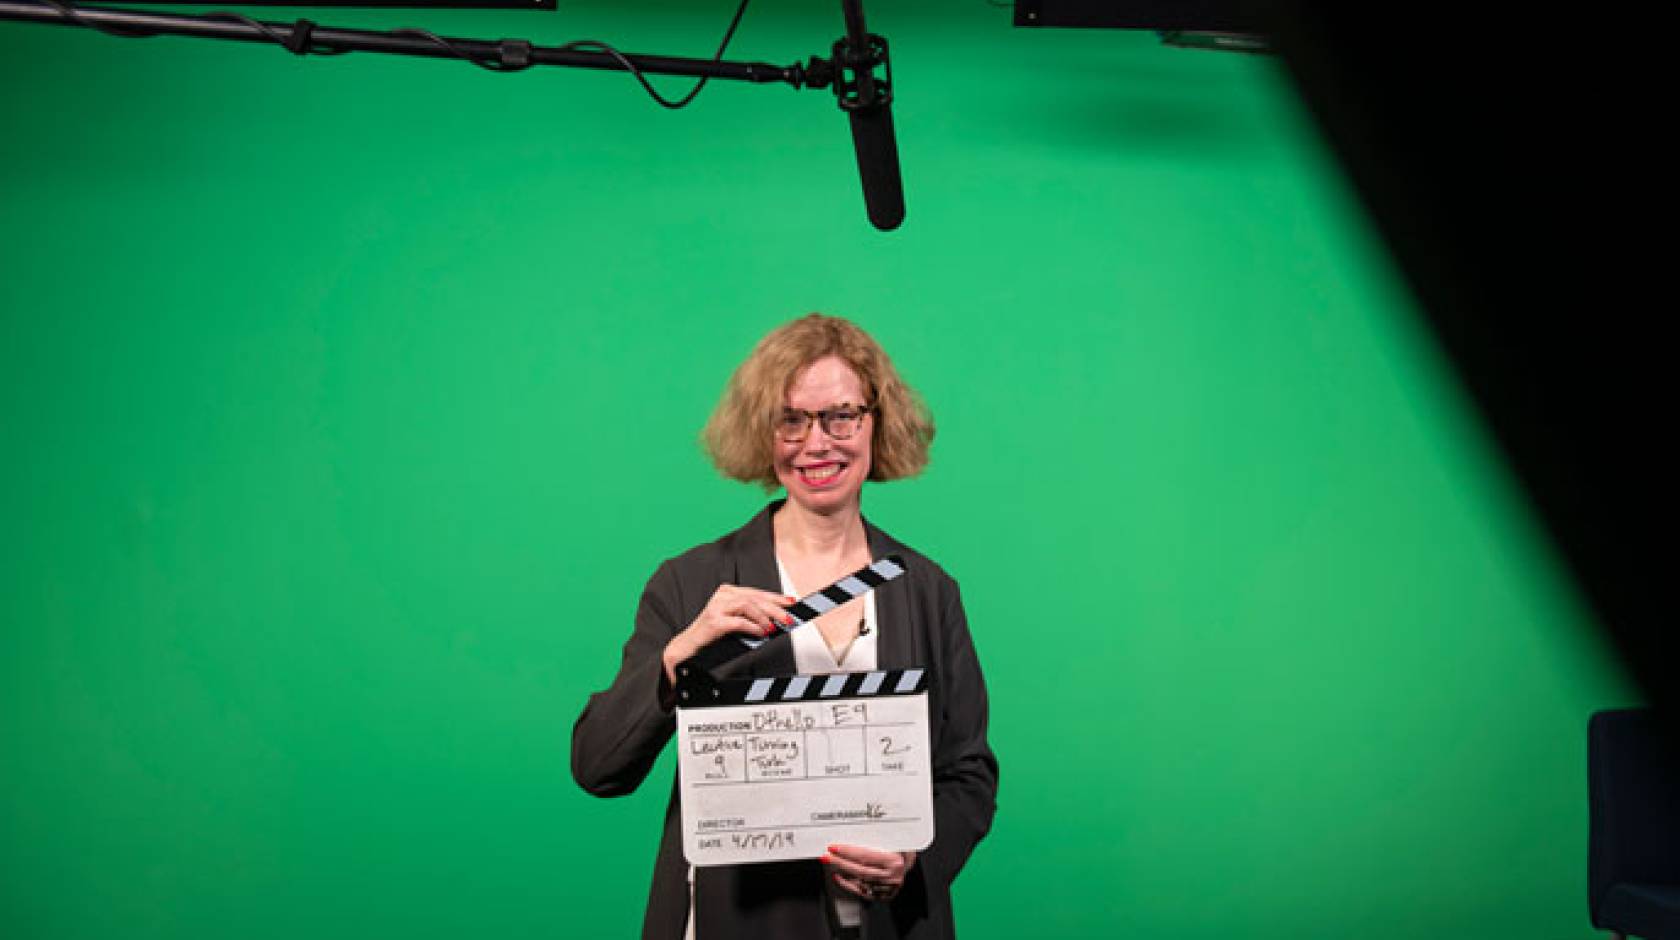 Professor holding a clapperboard